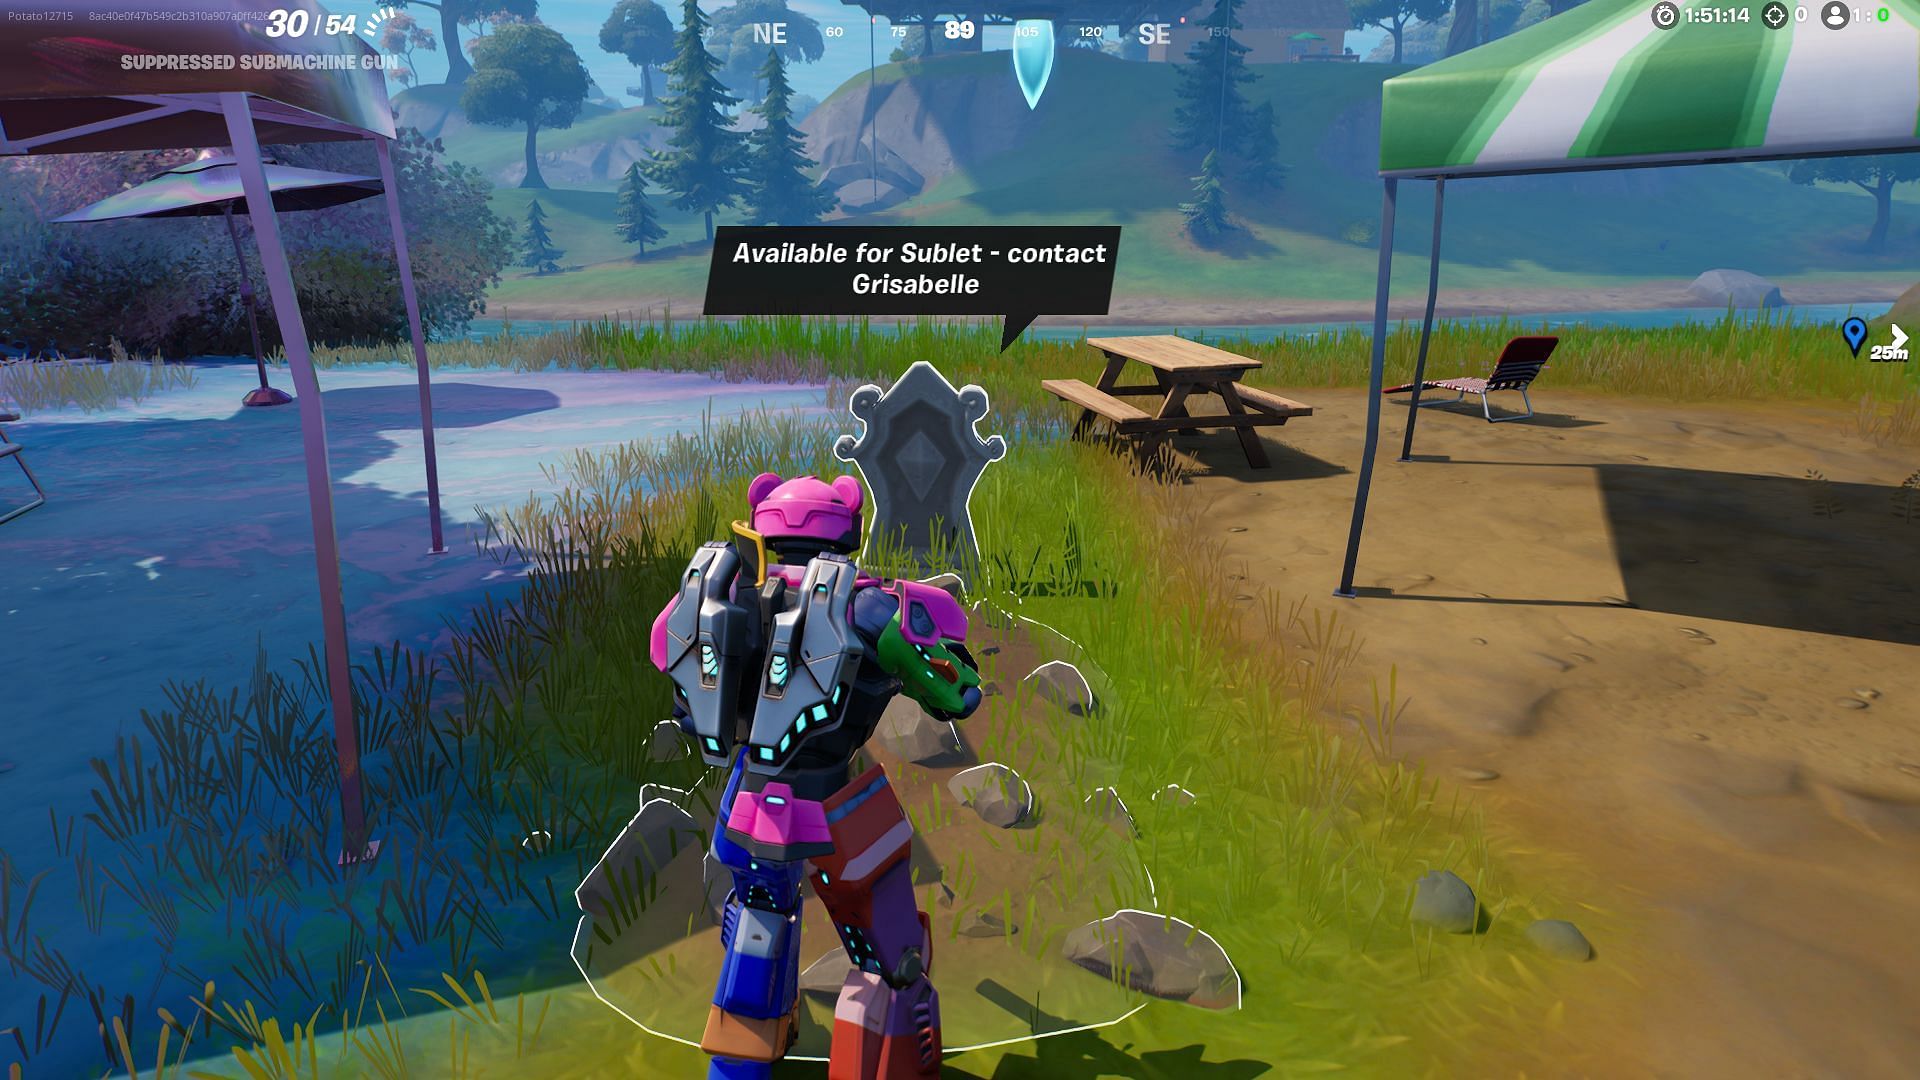 Note to self - Do not contact Grisabelle (Image via Epic Games/Fortnite)